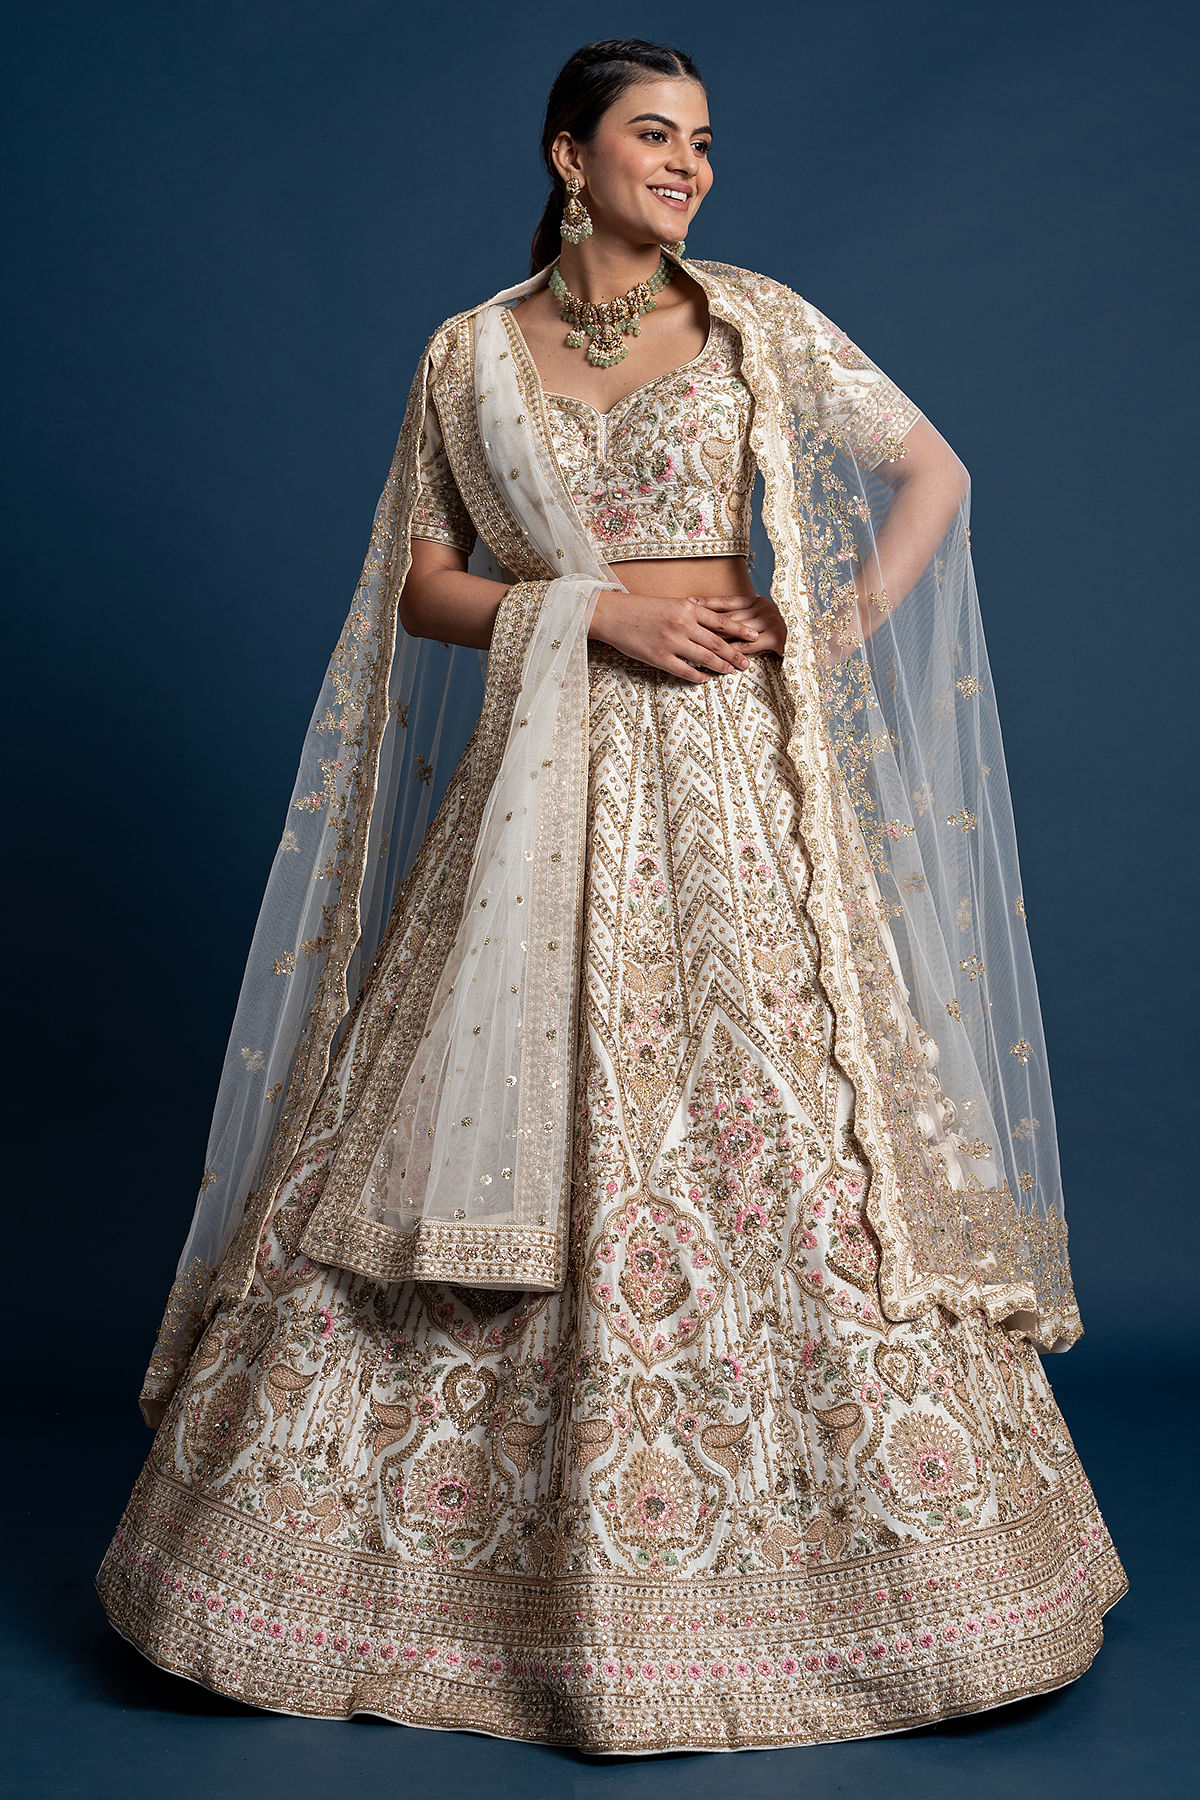 Exquisite Bridal Lehengas in the UK: Explore Trending Styles at Our Store